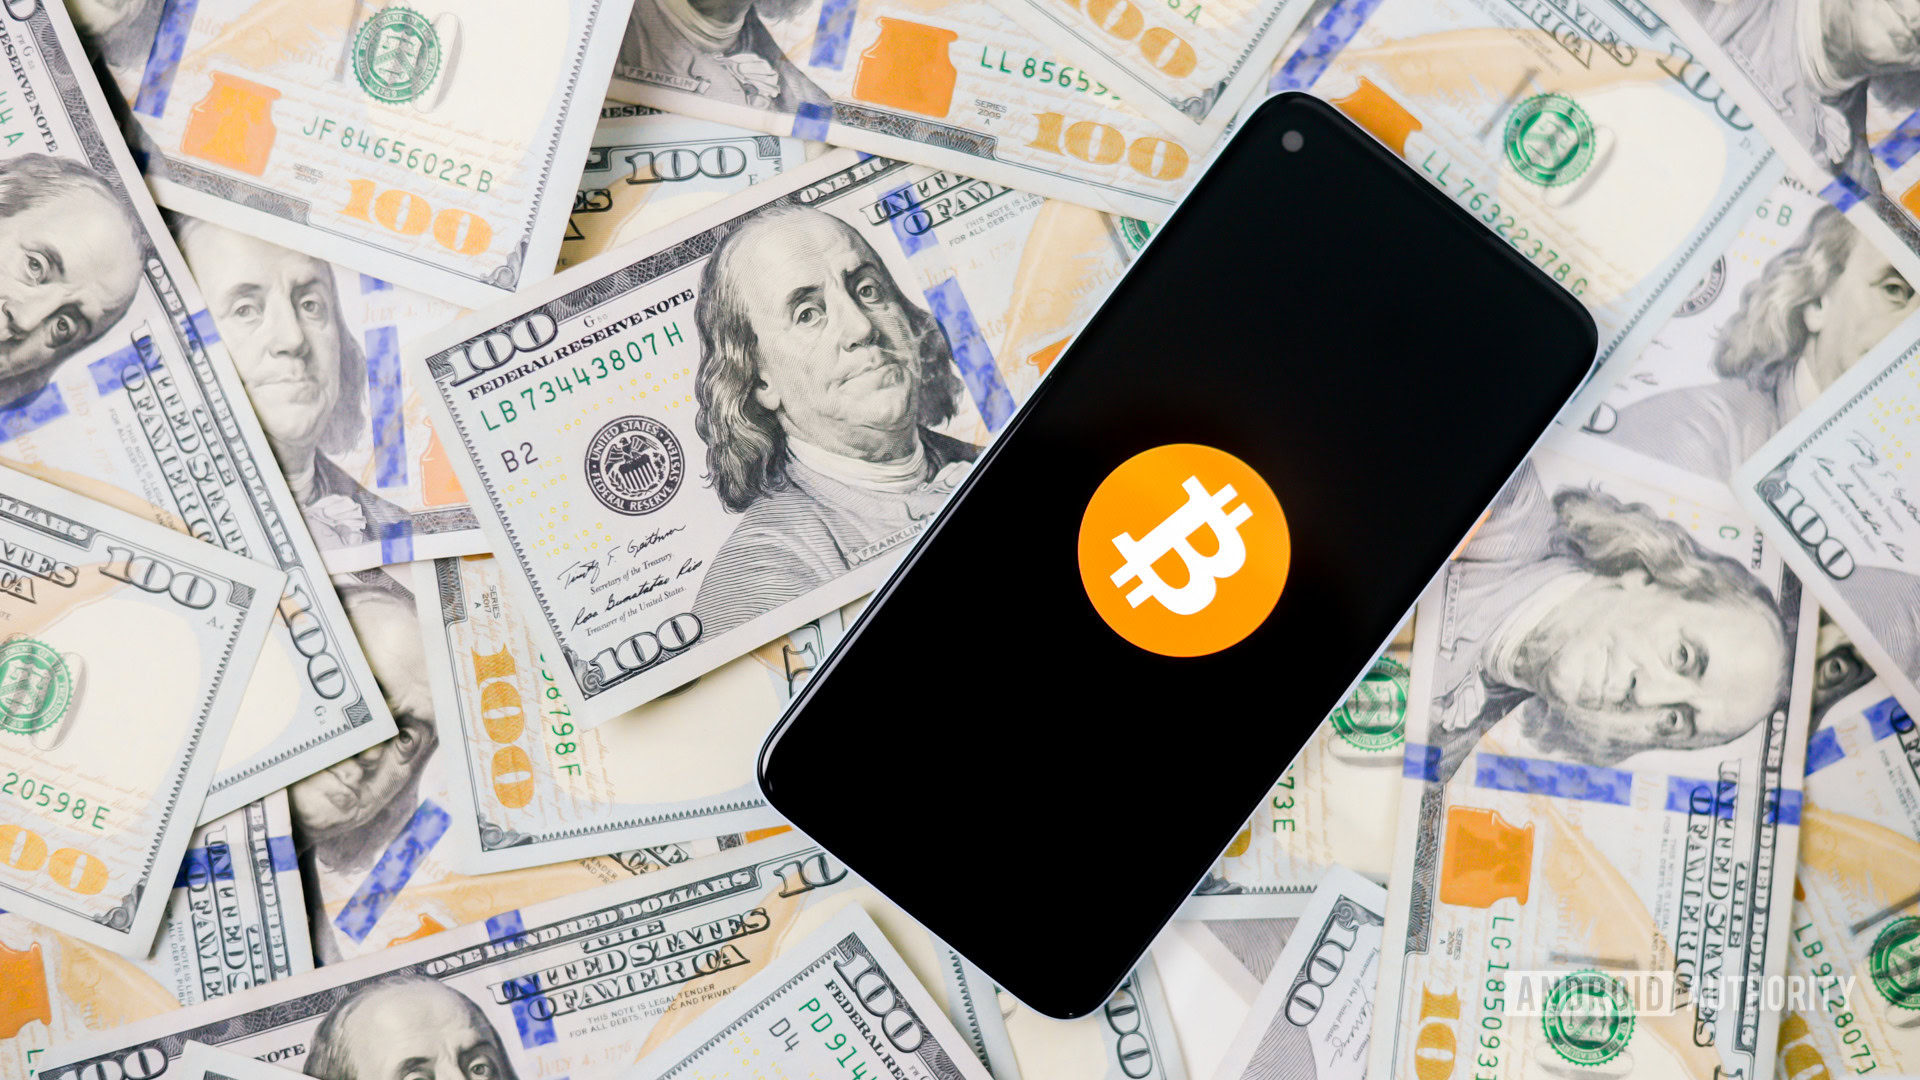 A stock photo of the Bitcoin logo on a dark smartphone screen that's lying on top of pile of $100 bills.